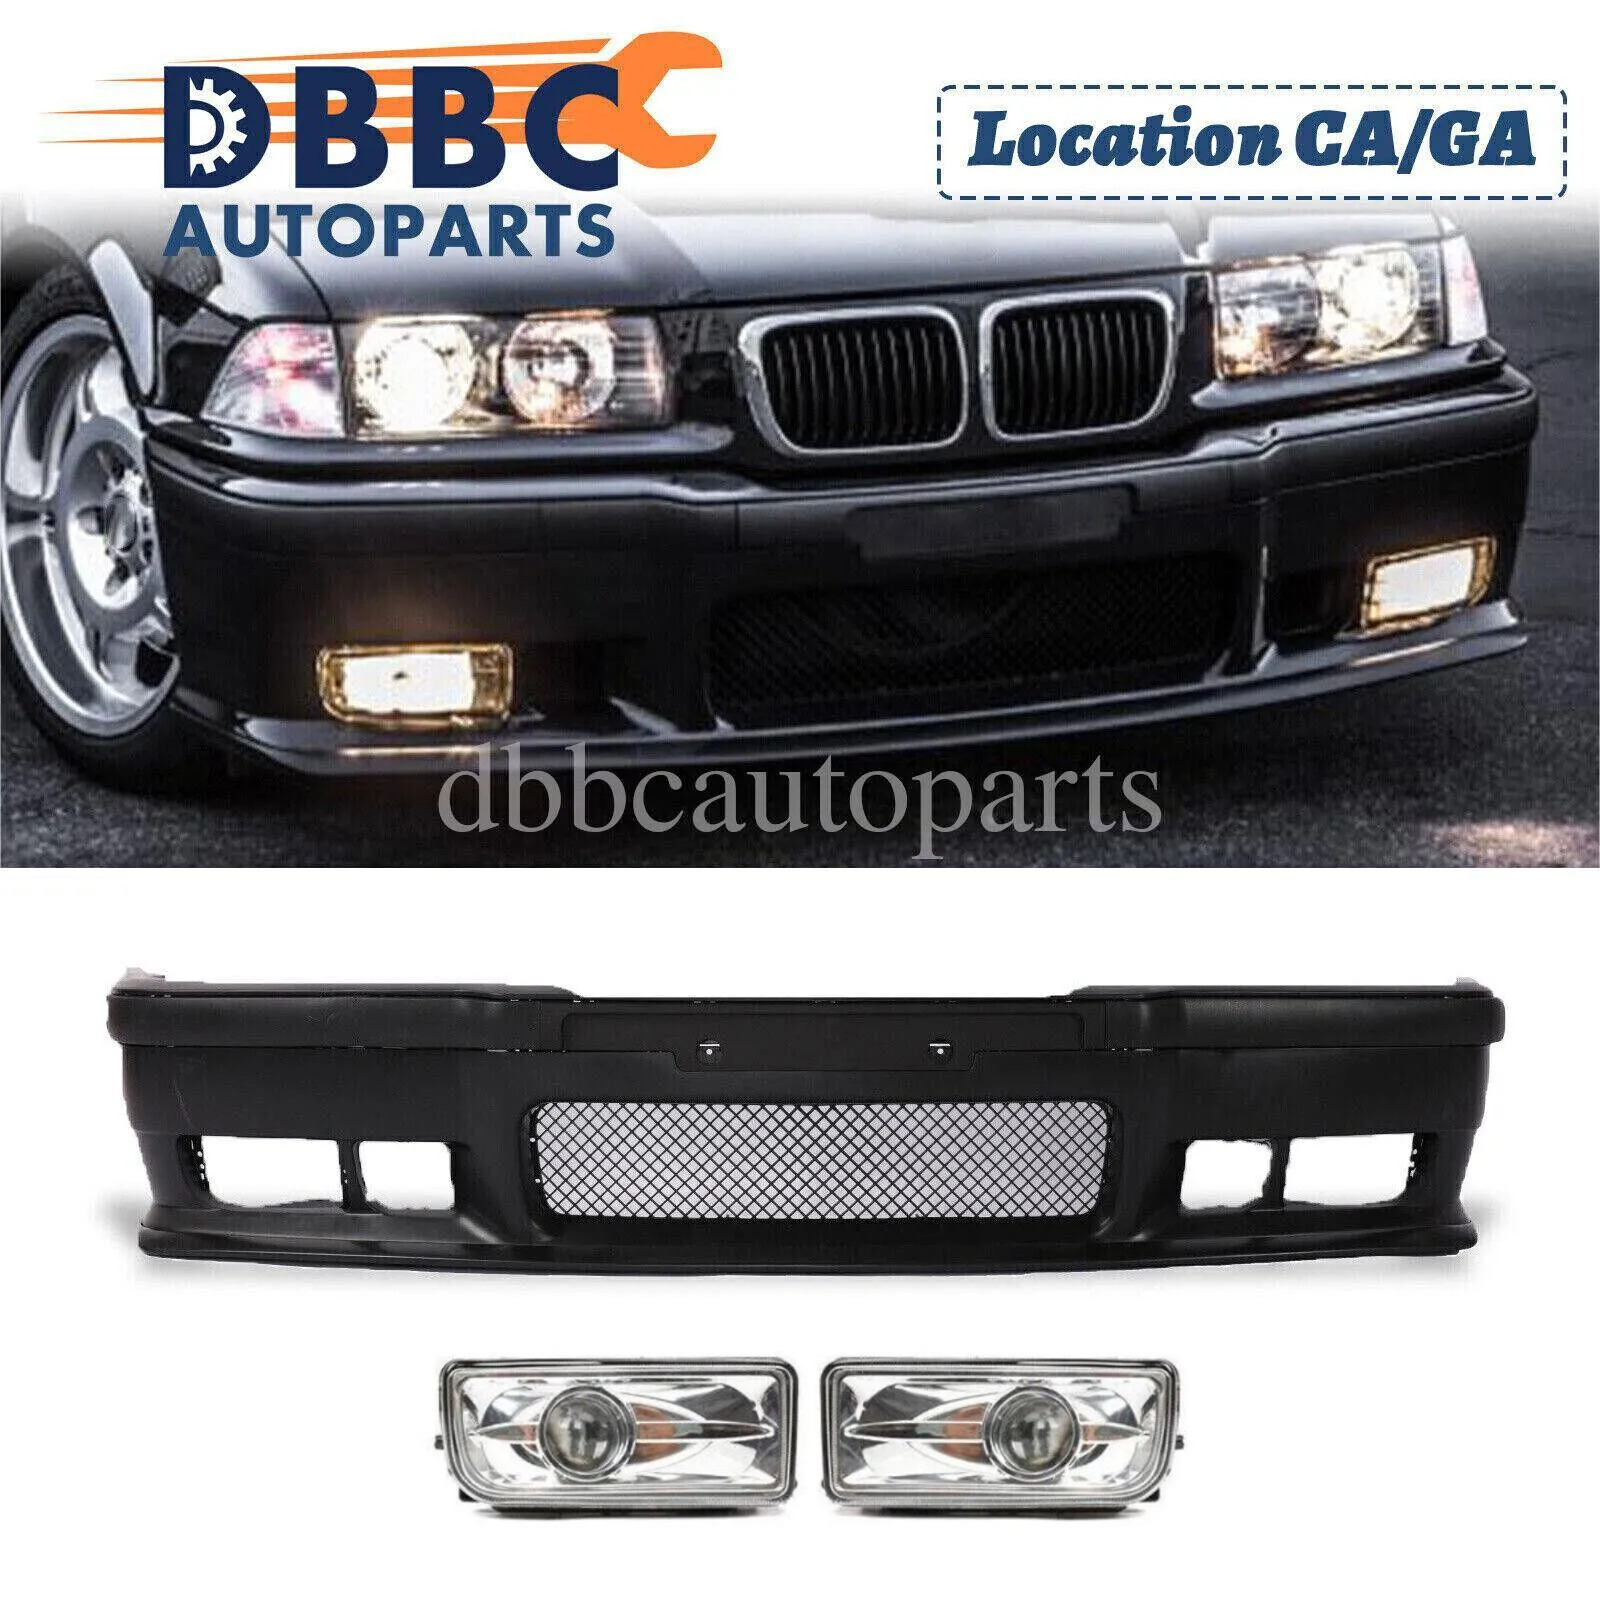 For 92-98 BMW E36 3-Series M3/M-Sport Style Front Bumper Cover w/FOG